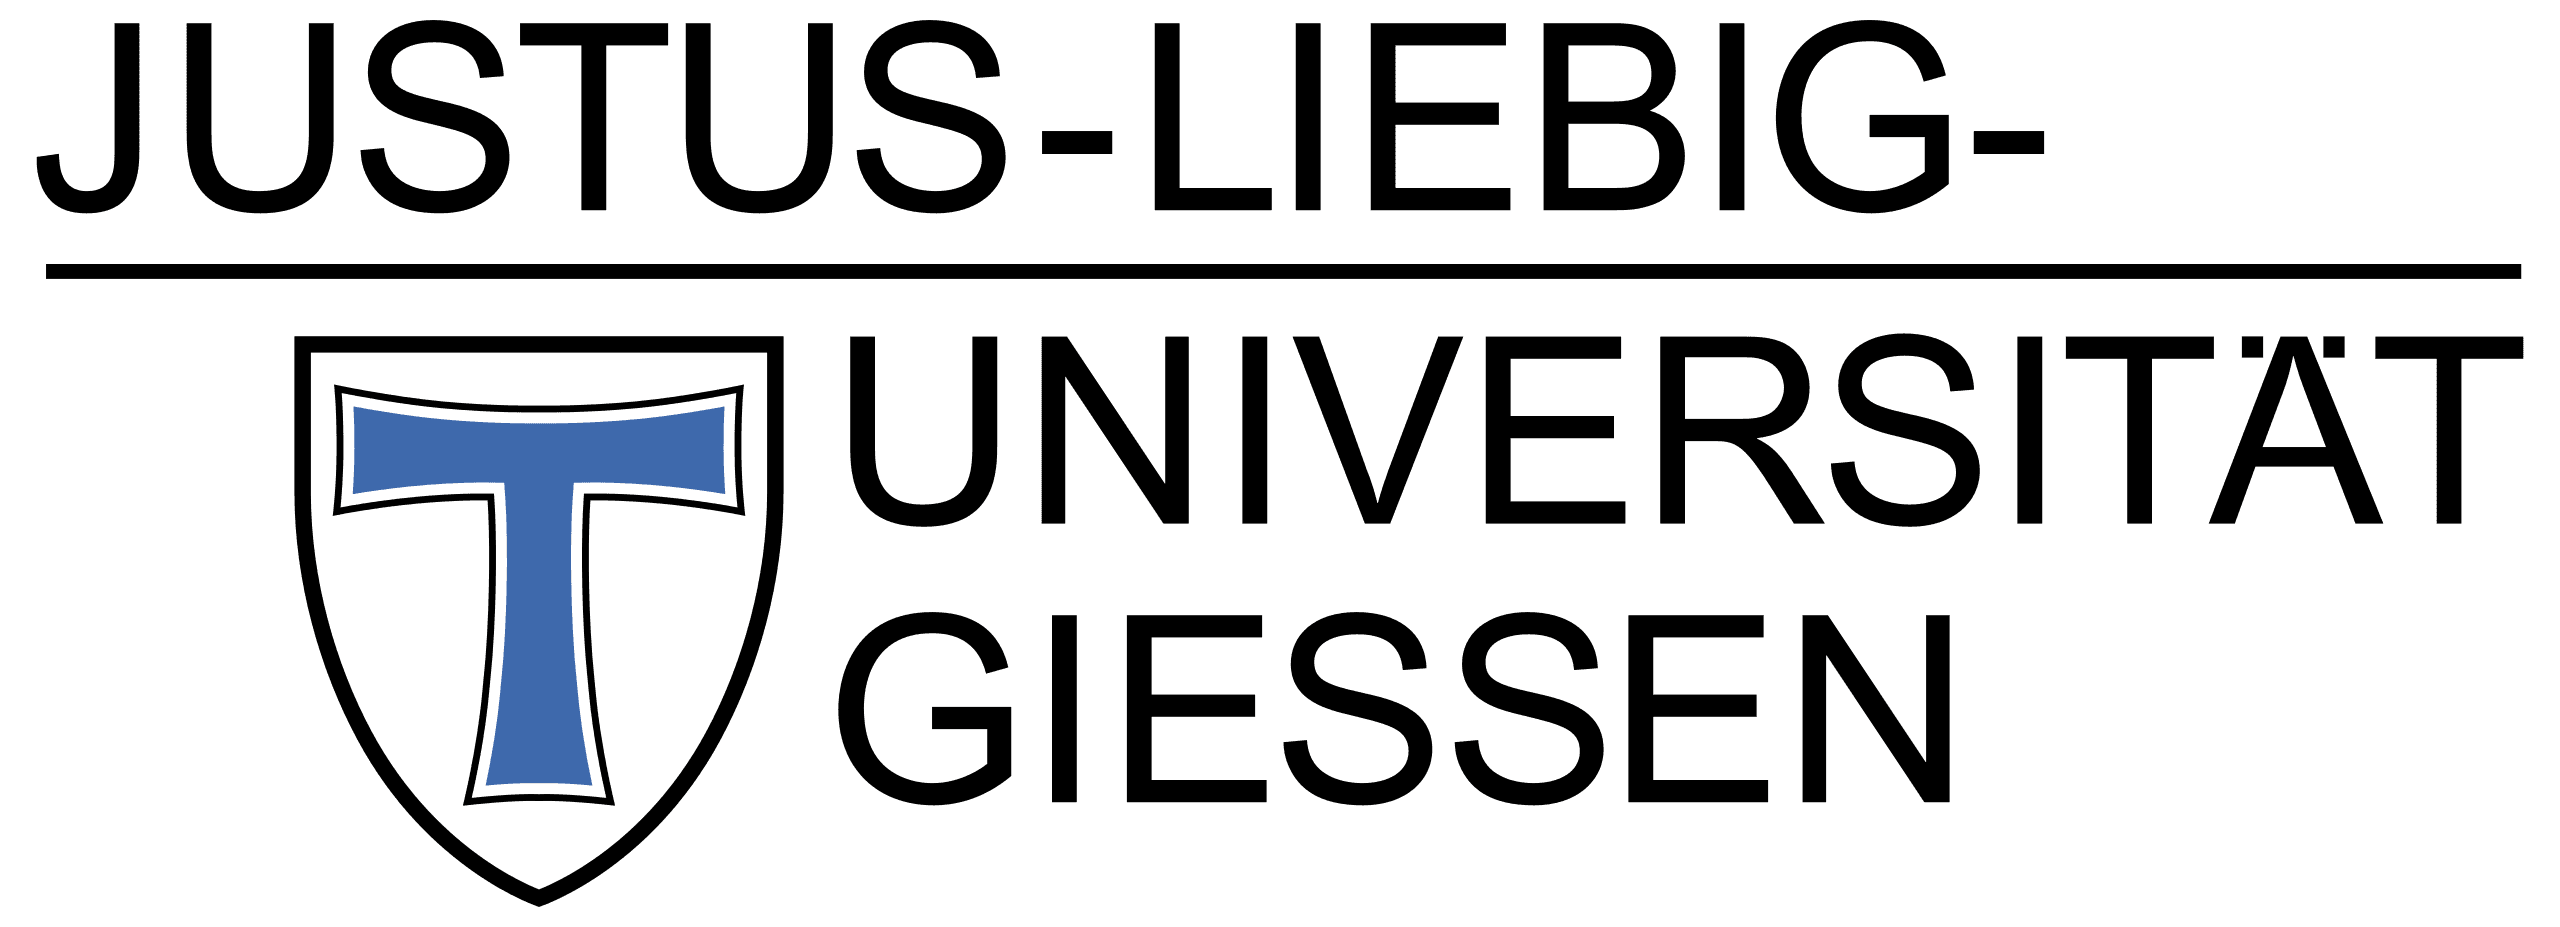 justus-liebig-university-giessen-9ae2004970-cover-picture